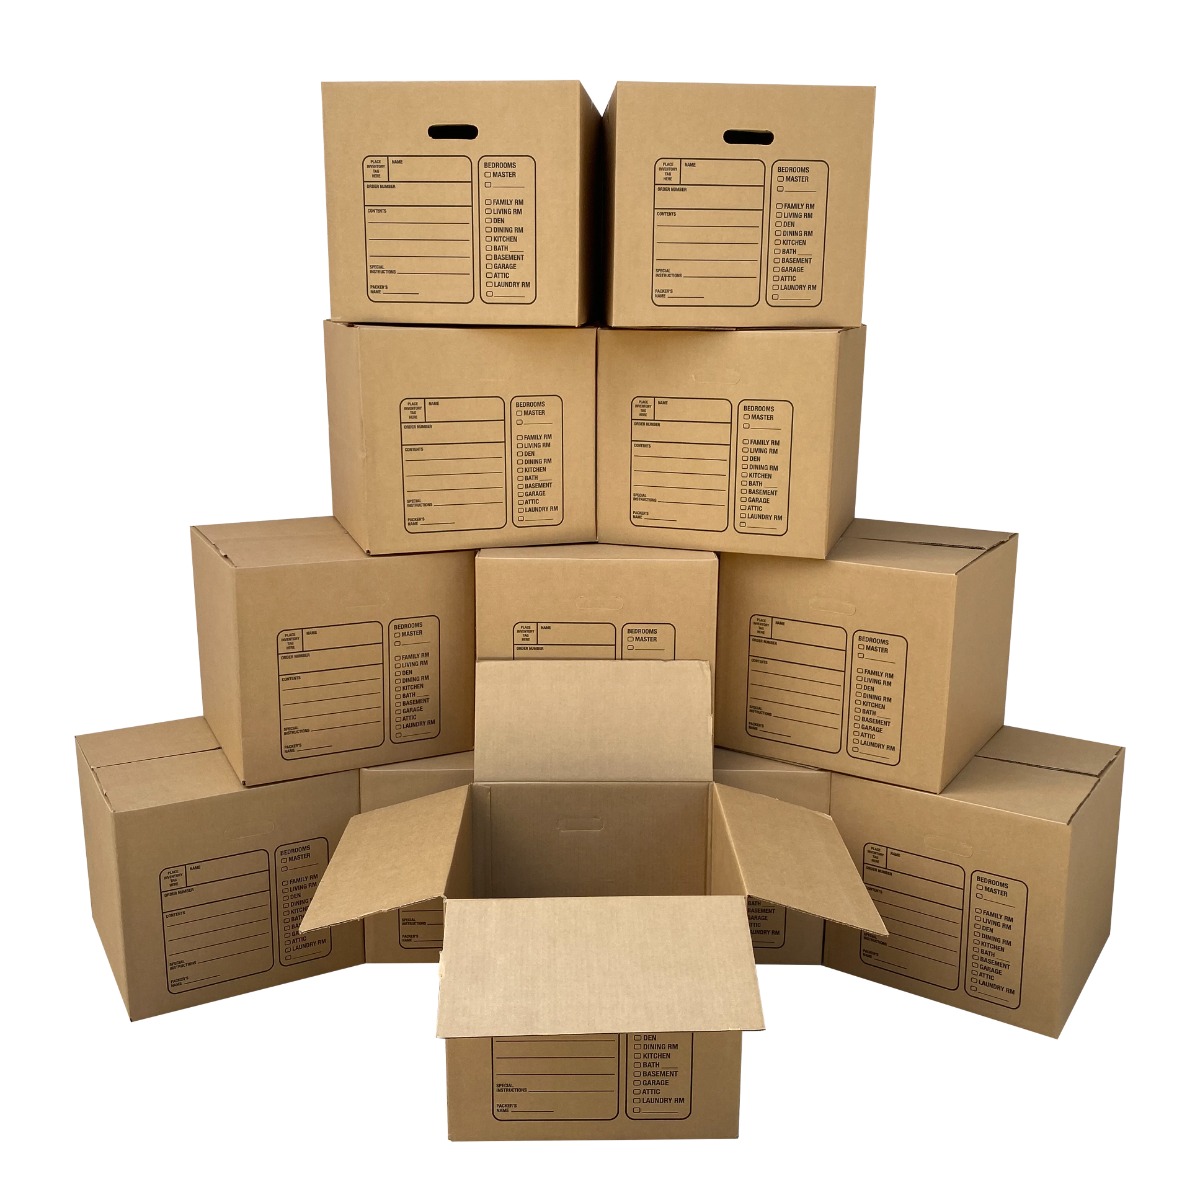 Cardboard Shipping Boxes - What You Should Know Before Them